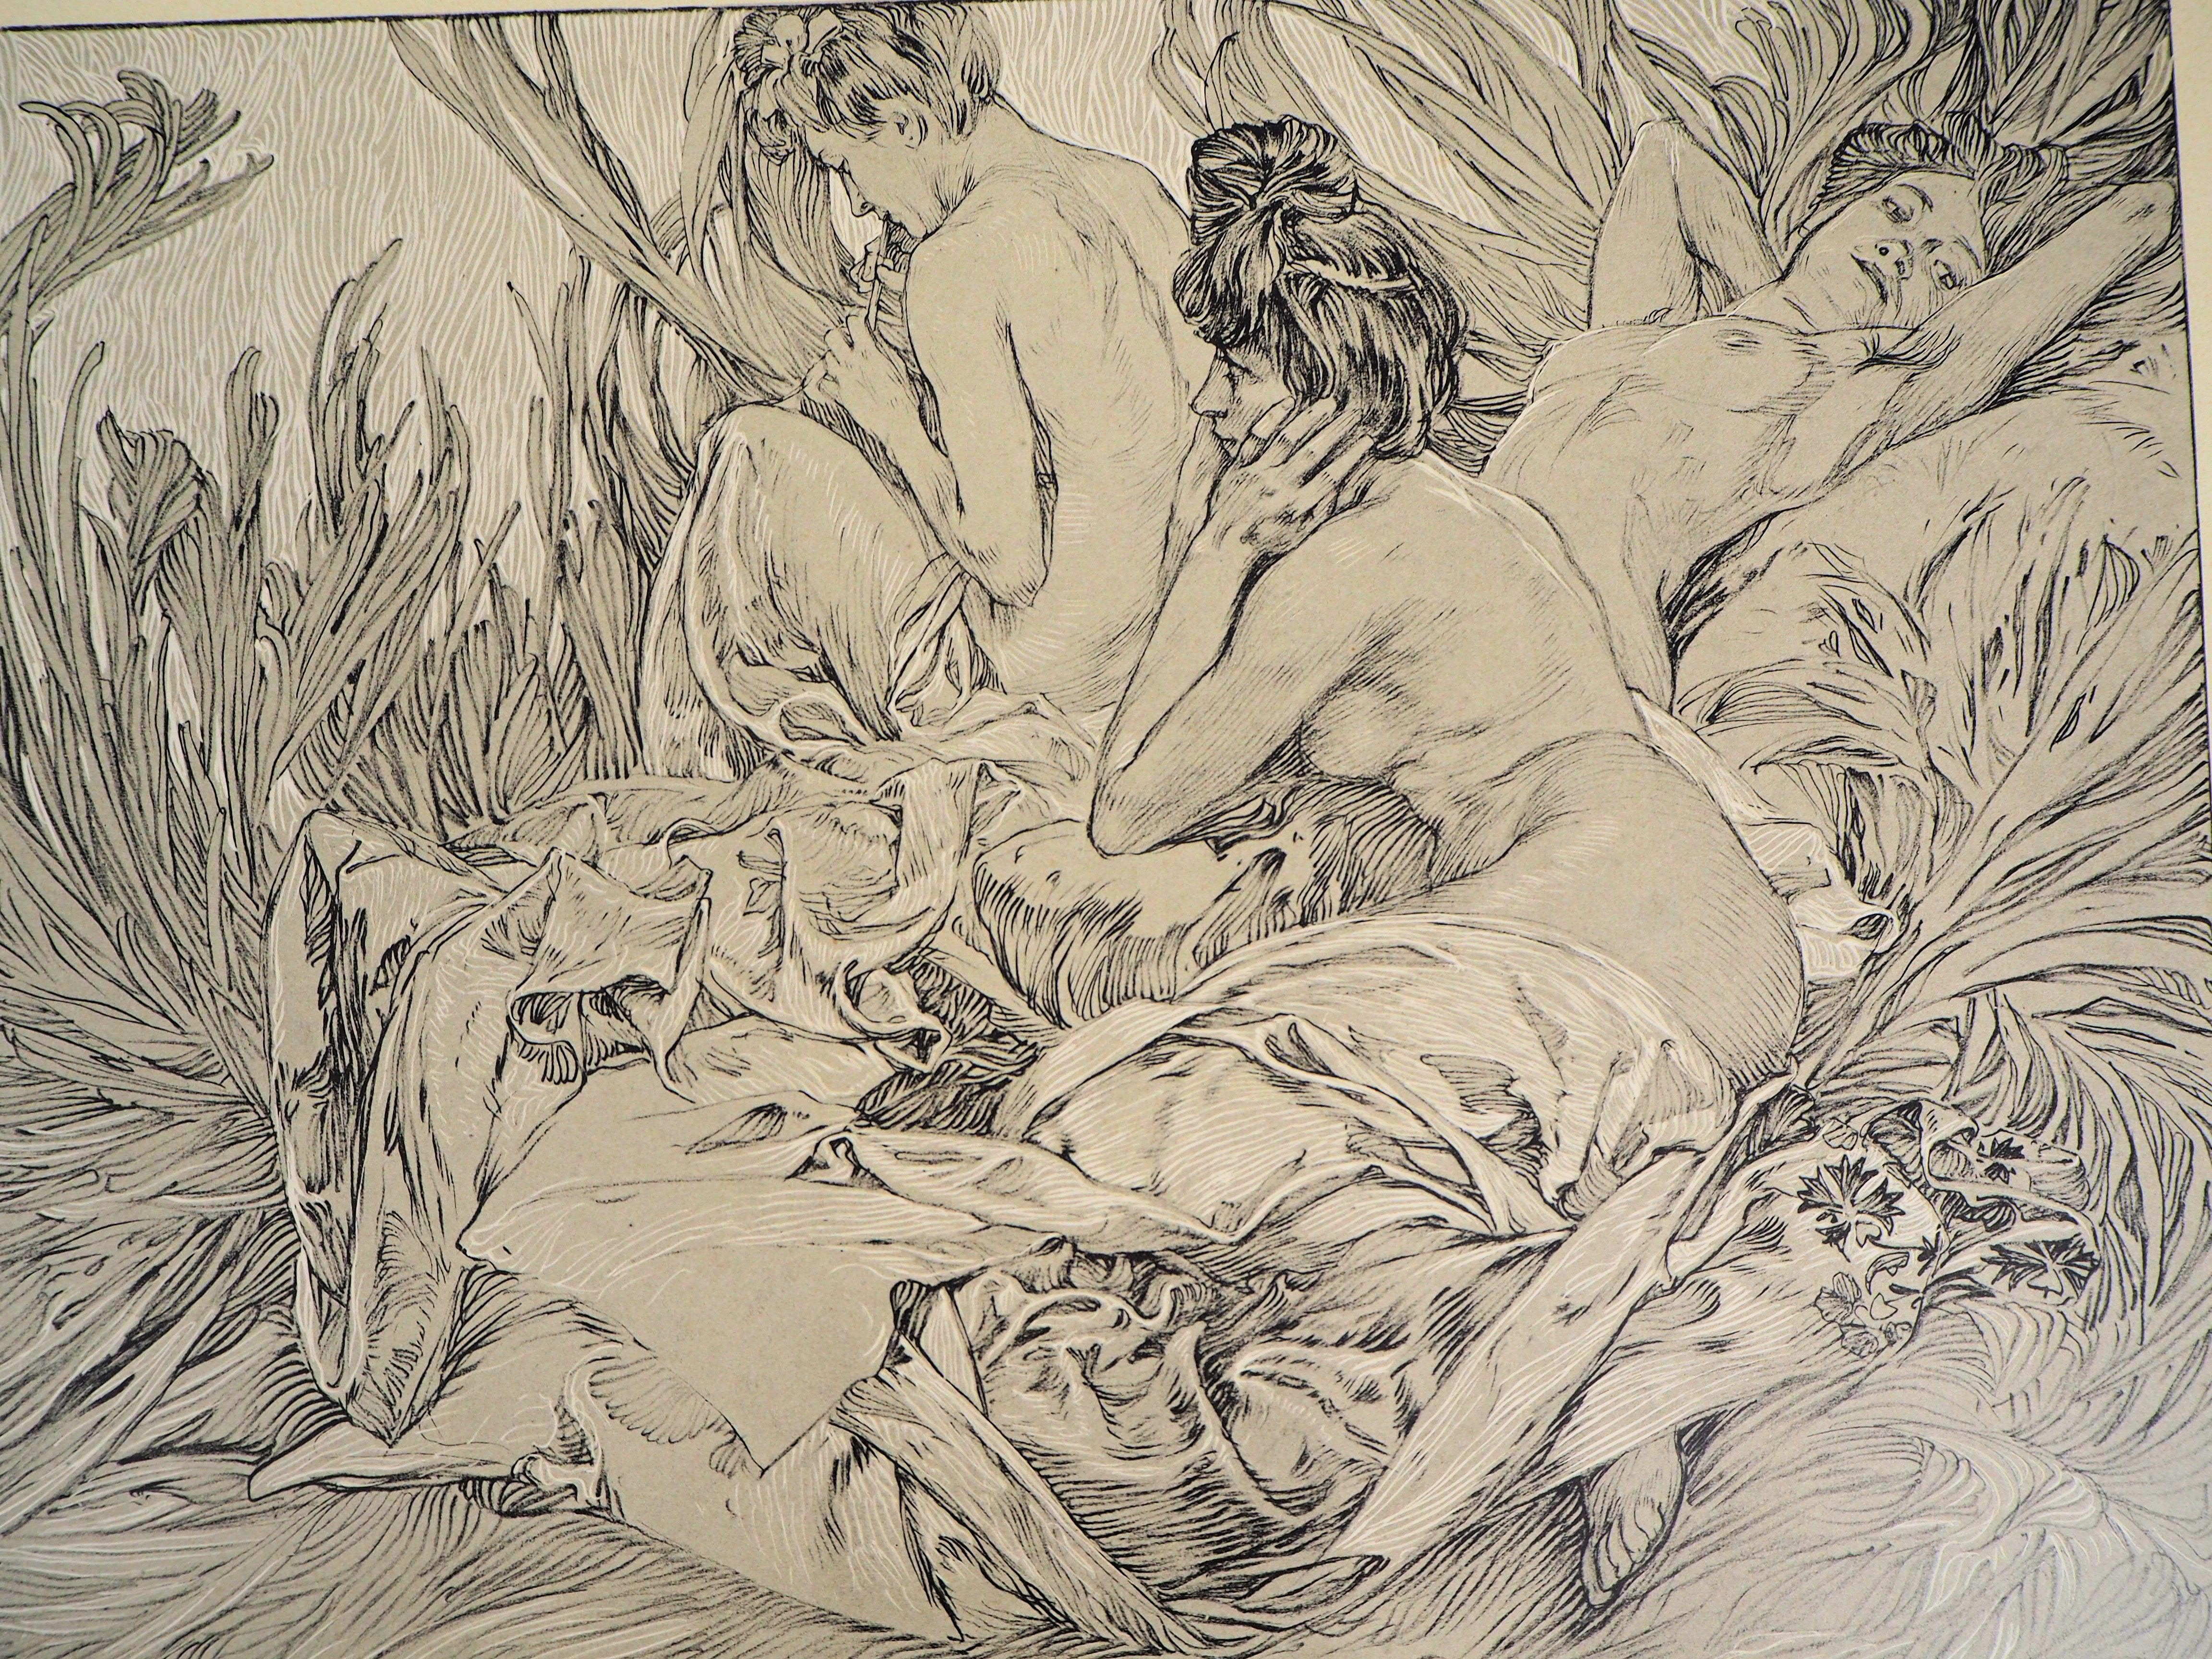 Reclining Models in a Landscape - Lithograph 1902 - Print by Alphonse Mucha